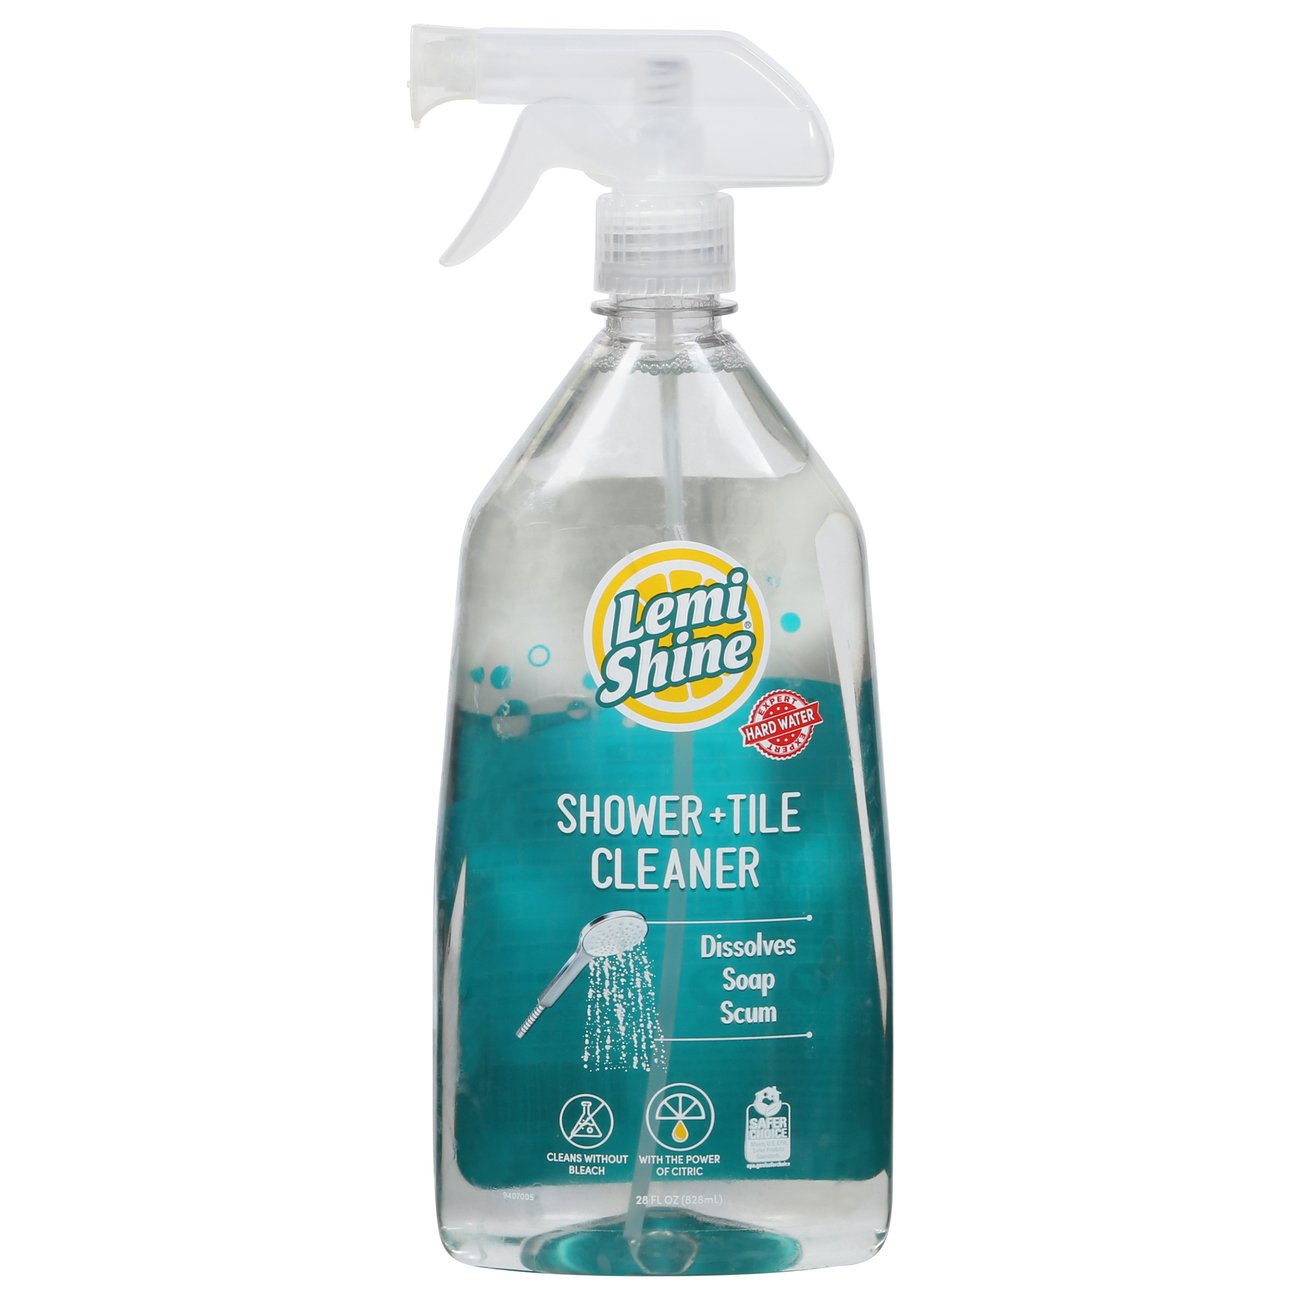 Lemi Shine Shower + Tile Cleaner | Removes Soap Scum & Hard Water Stains |  Bathroom Cleaner Spray for Tub, Shower, Sink, and Tile Cleaning | Powered